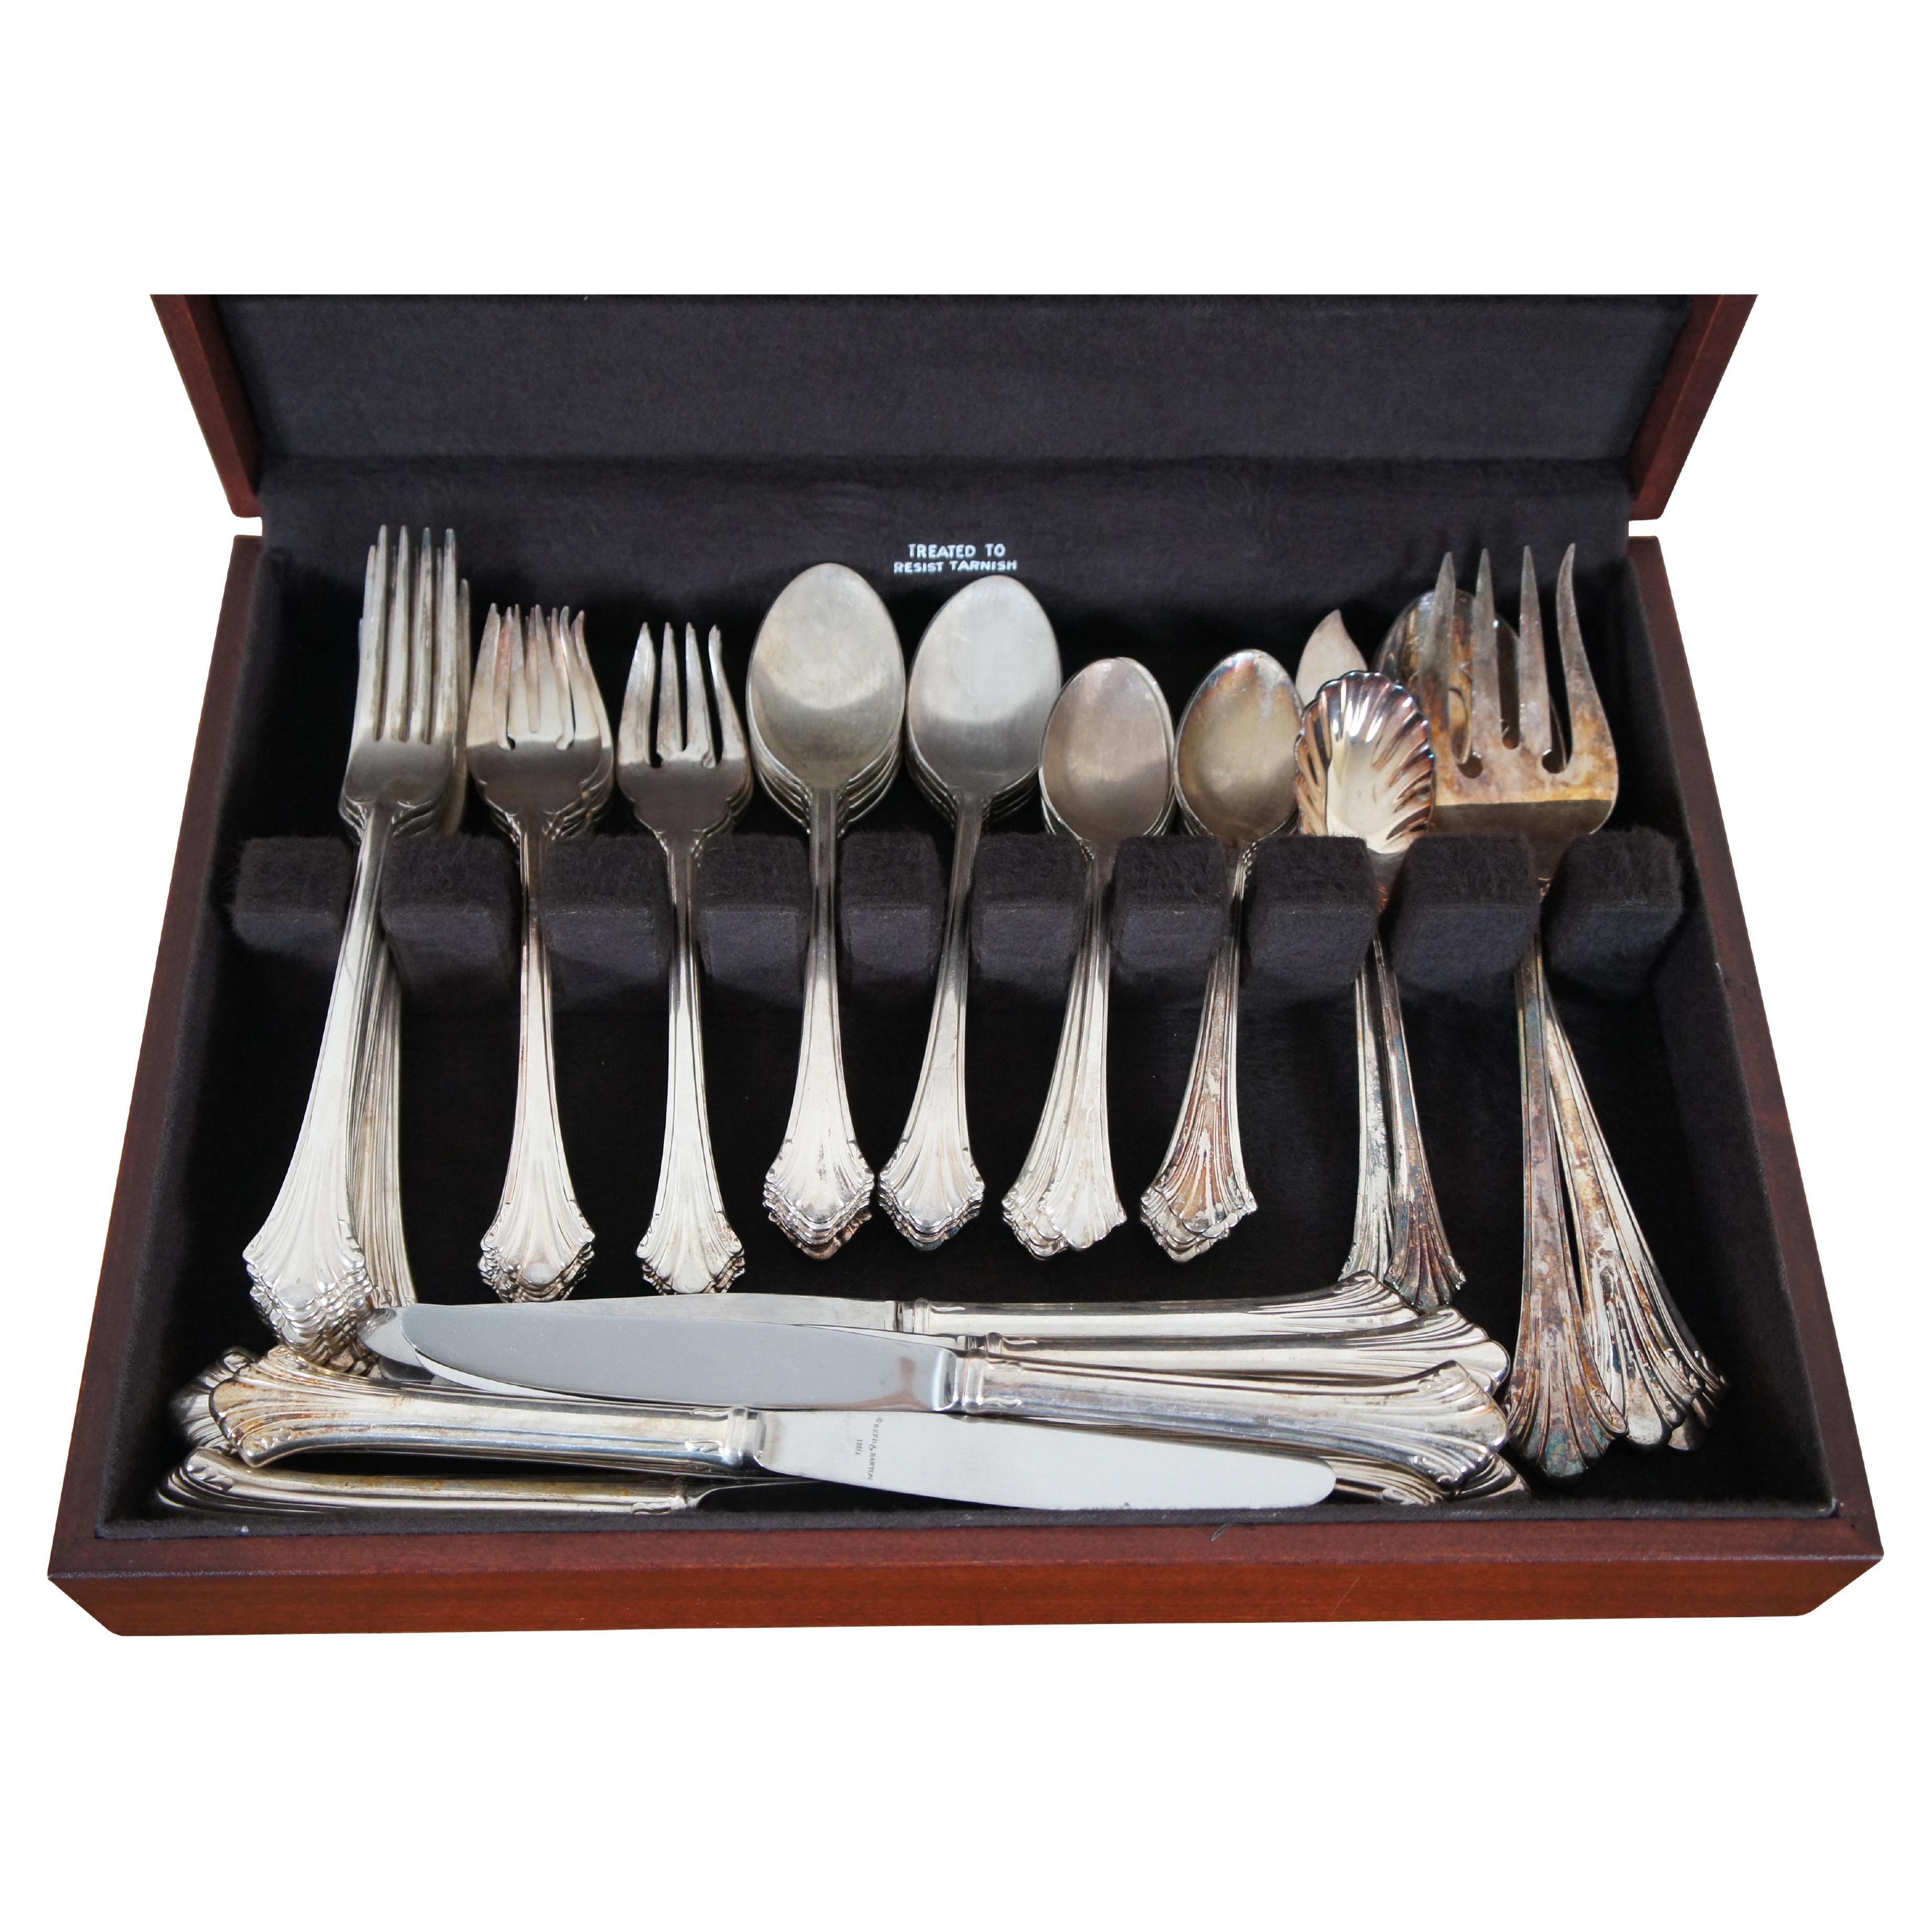 65 Pc Vintage Reed & Barton Highlands Silver Plate Flatware Set and Case